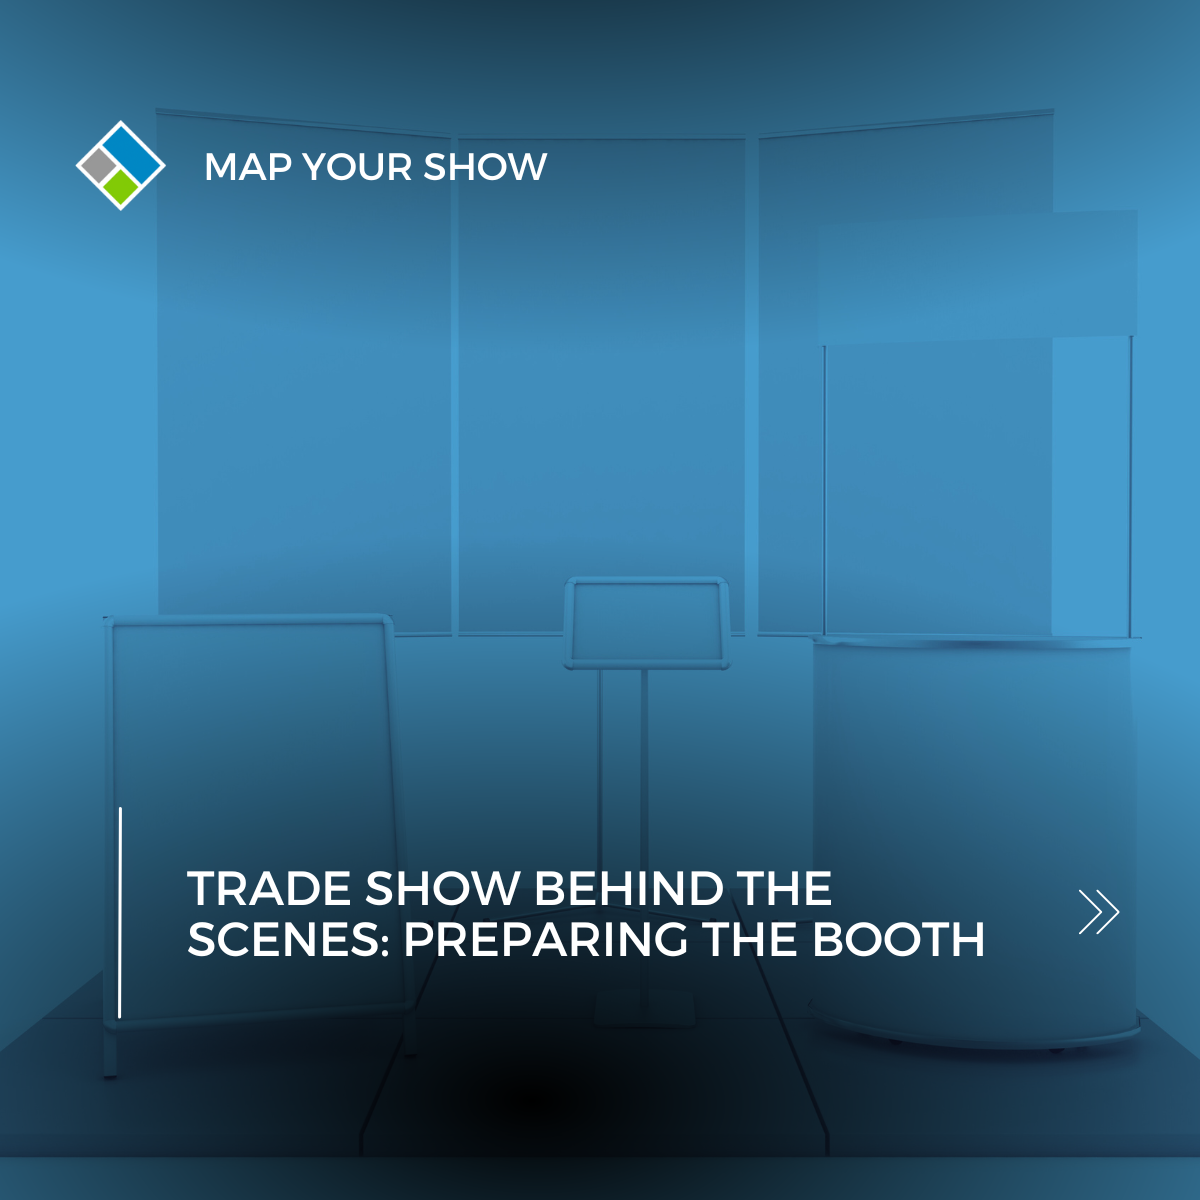 Trade Show Behind the scenes, preparing the trade show booth. Map Your Show, Event Management Technology